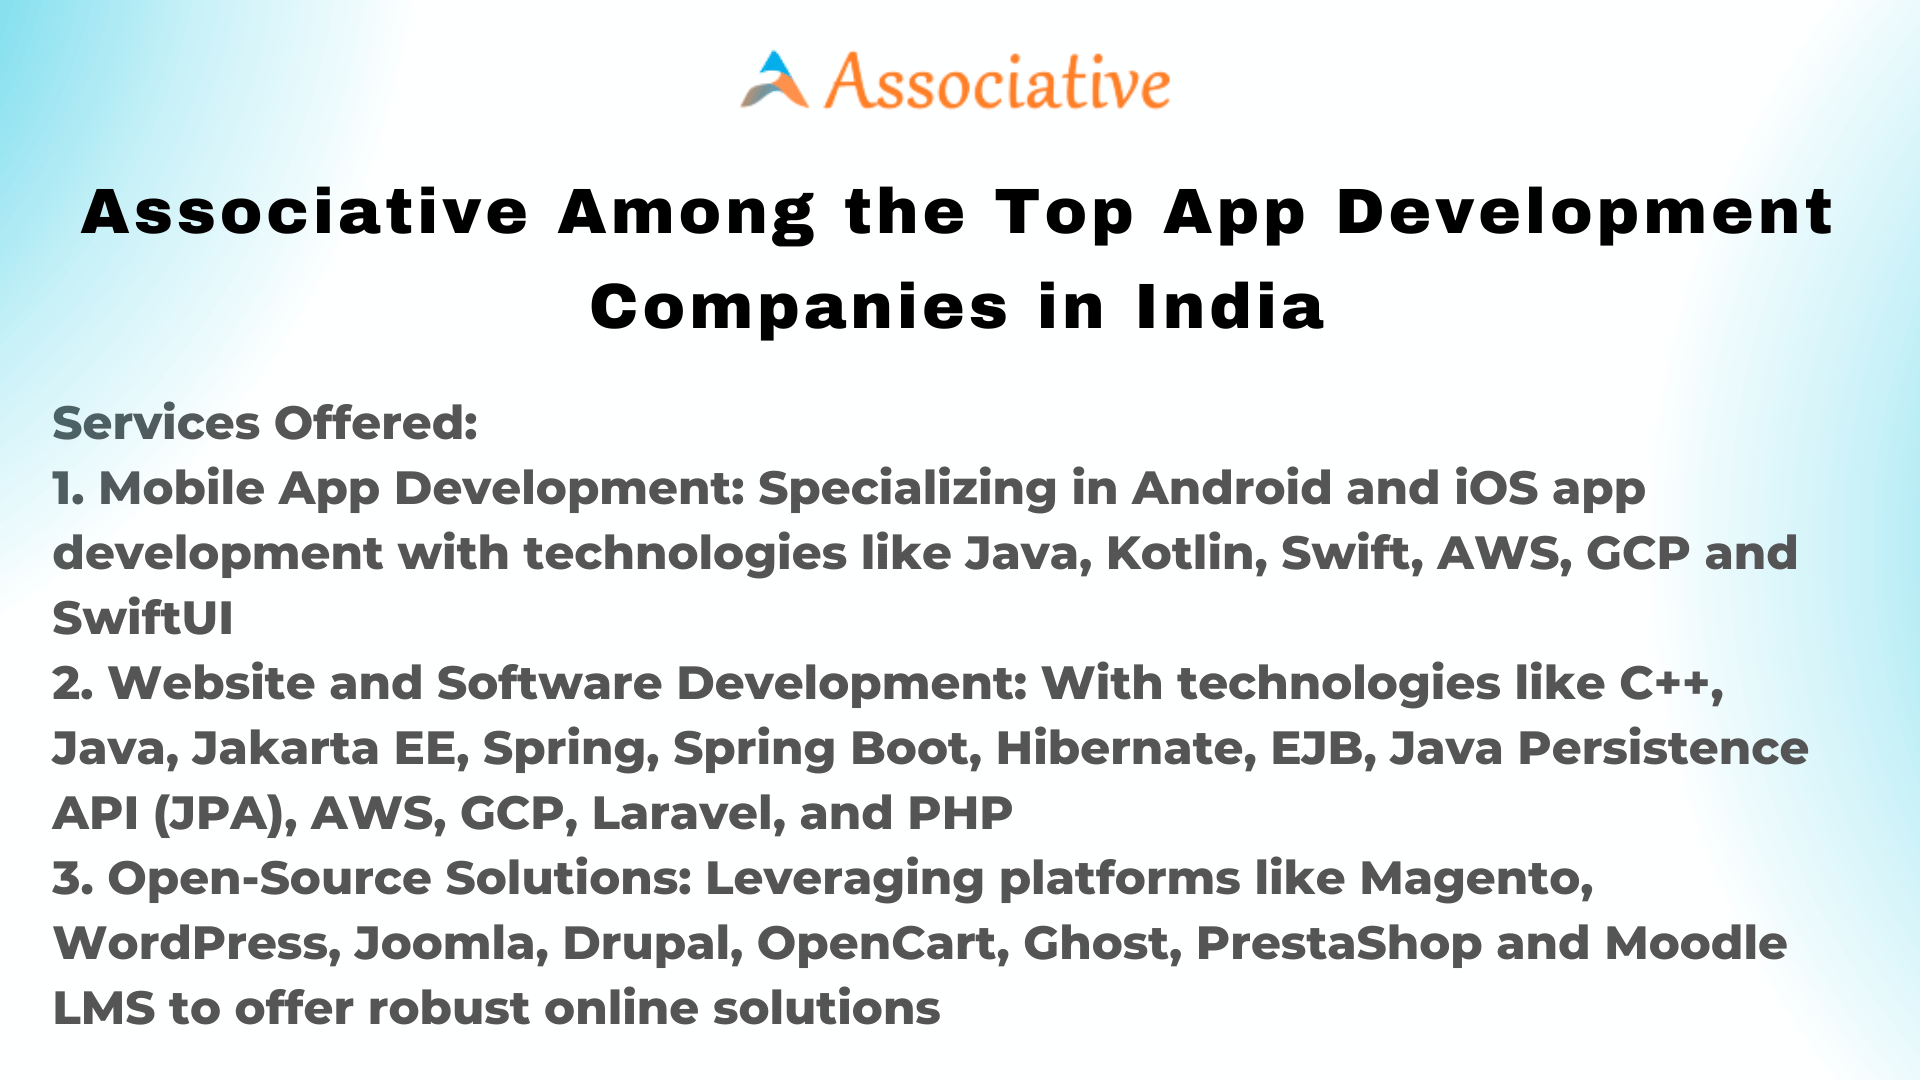 Associative Among the Top App Development Companies in India